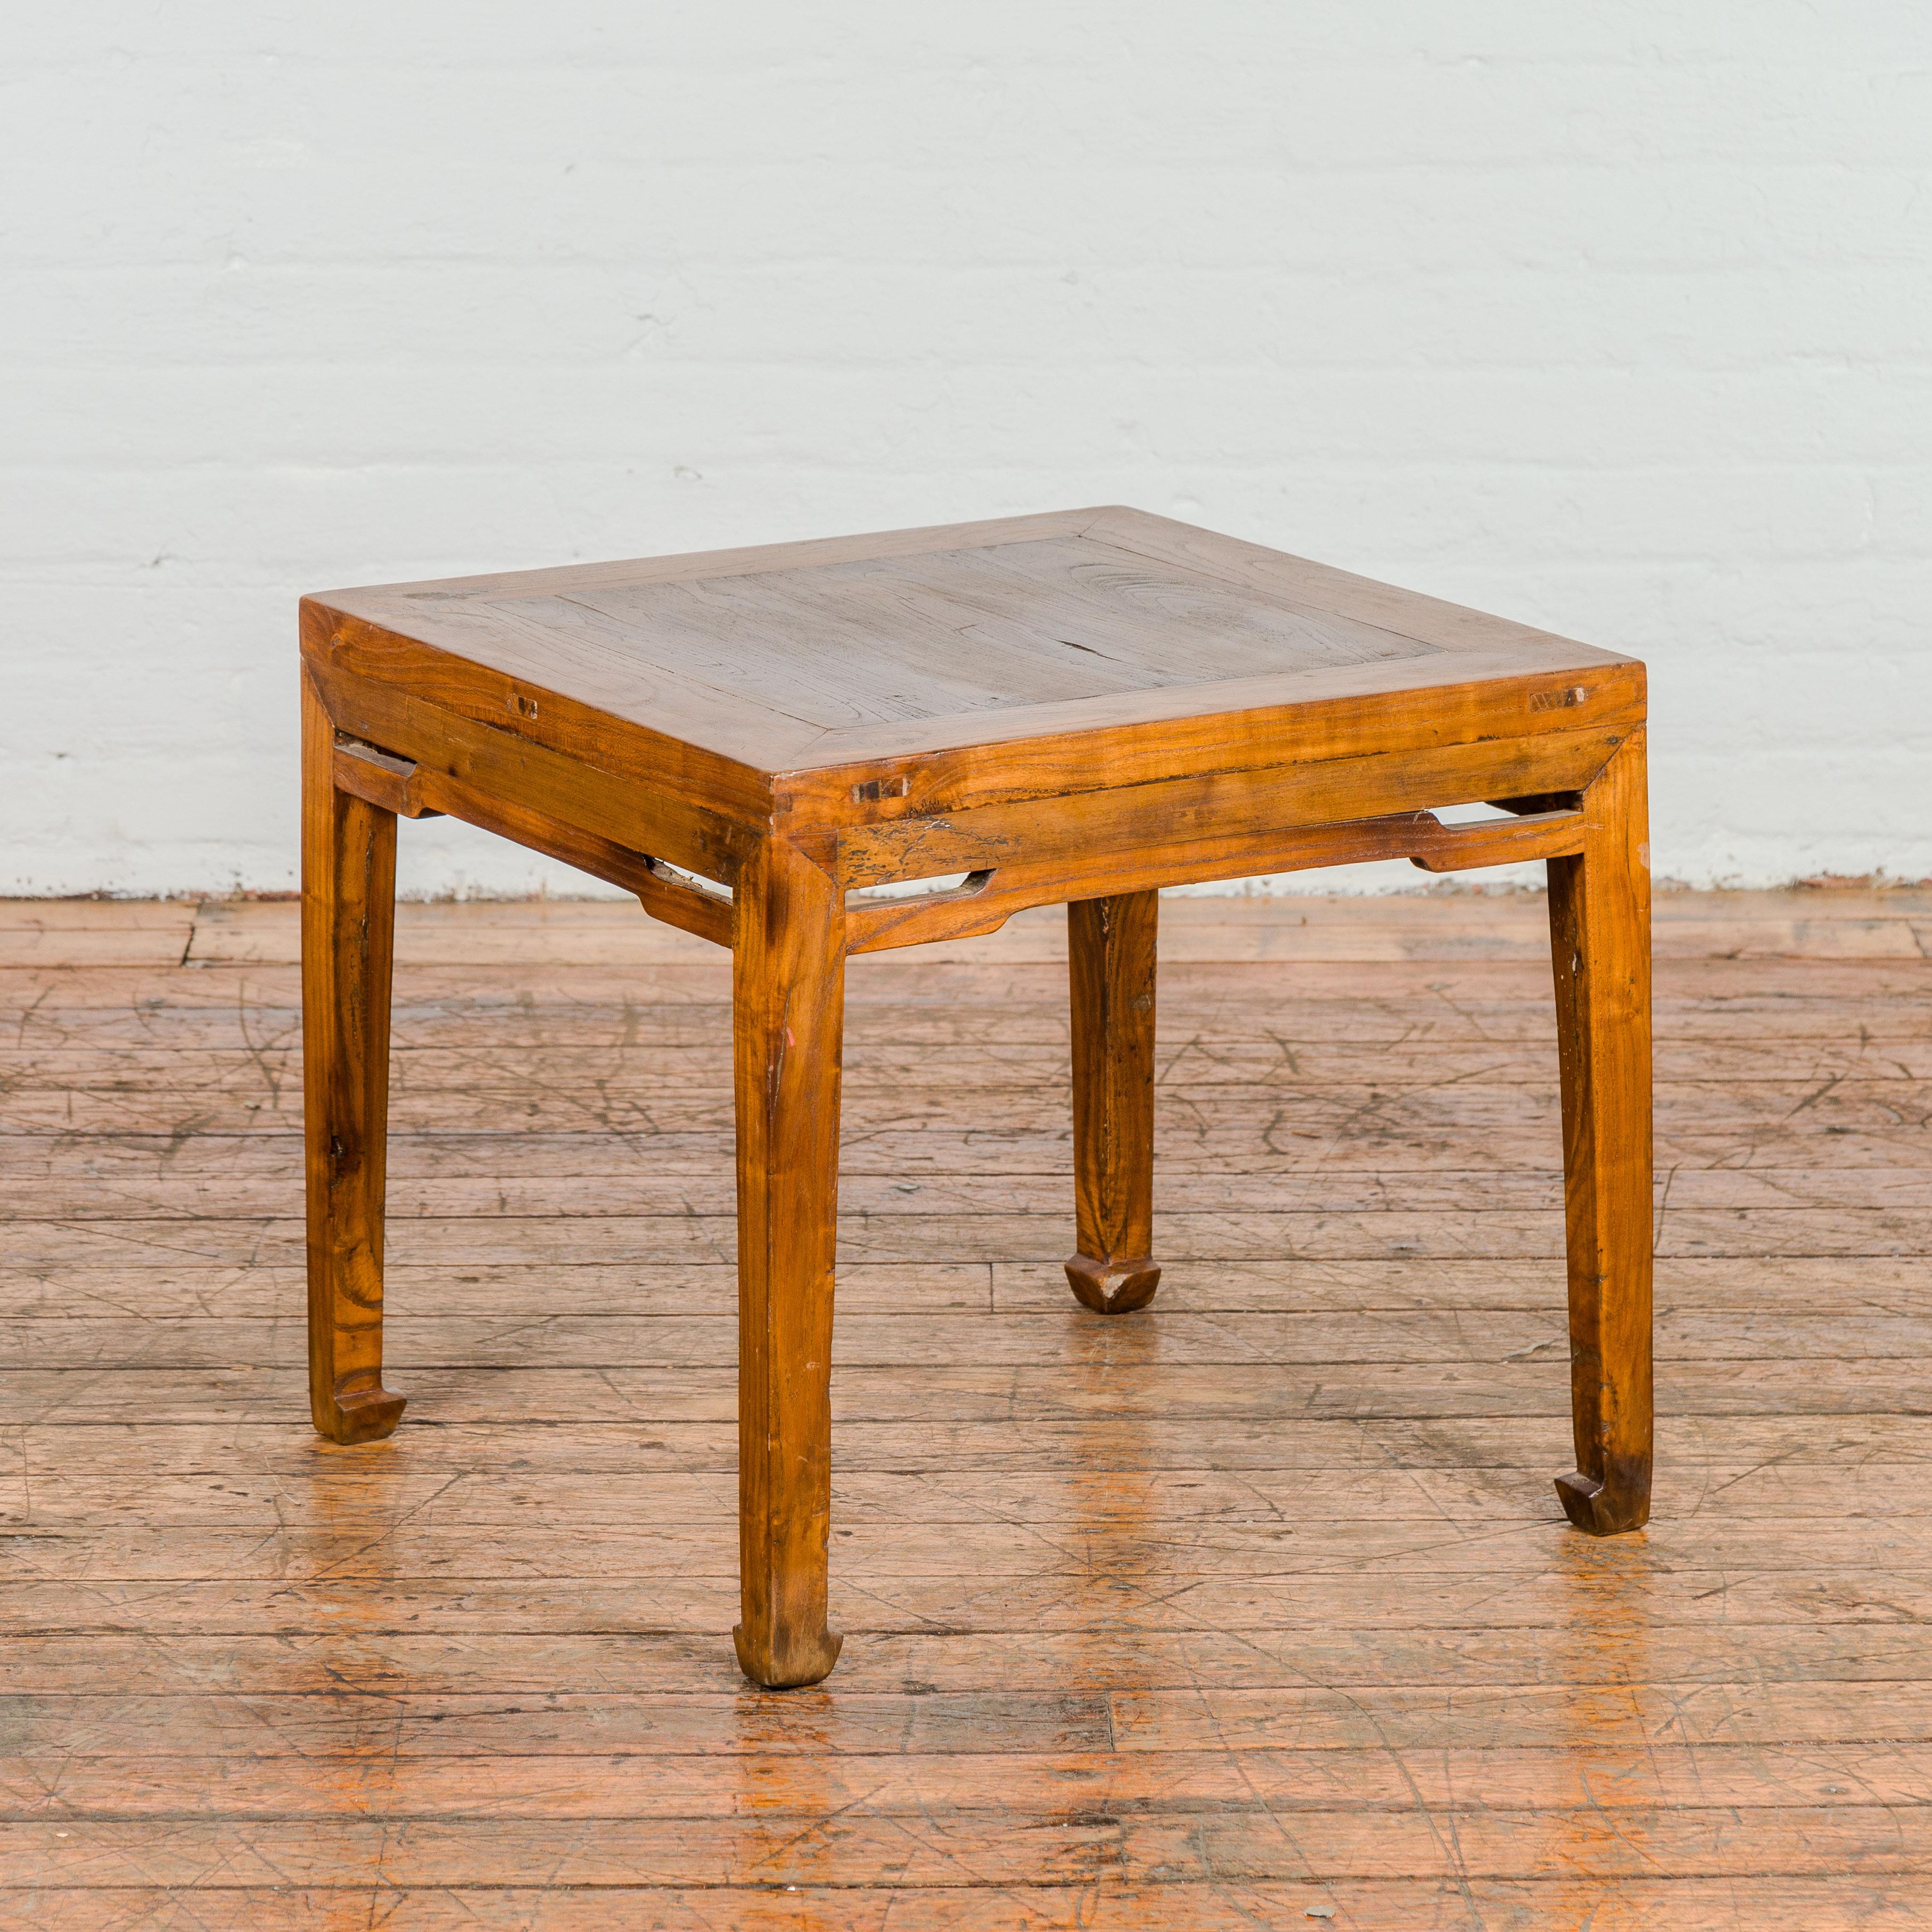 Qing Dynasty Elm Stool or Drinks Table with Horse Hoof Feet and Humpback Apron For Sale 6